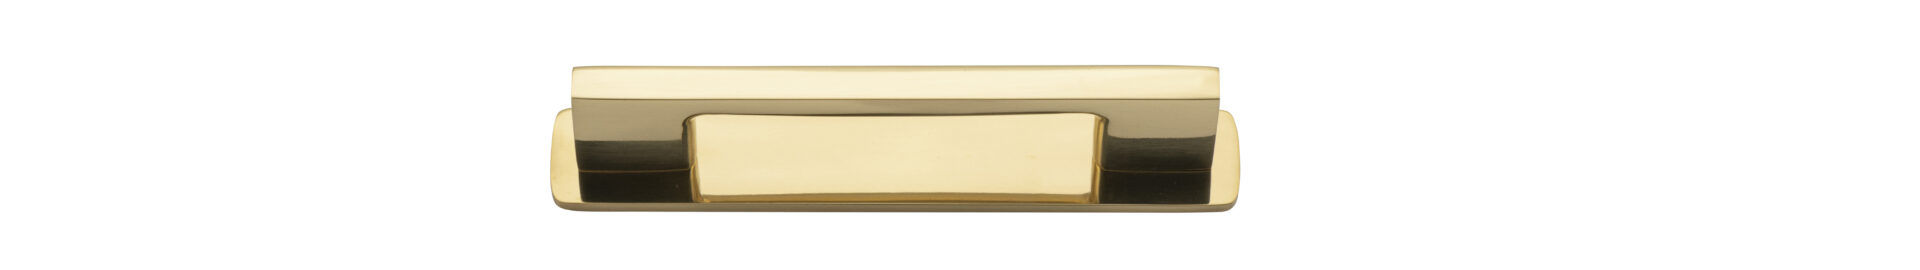 0514B - Cali Cabinet Pull with Backplate - CTC 96mm - Polished Brass